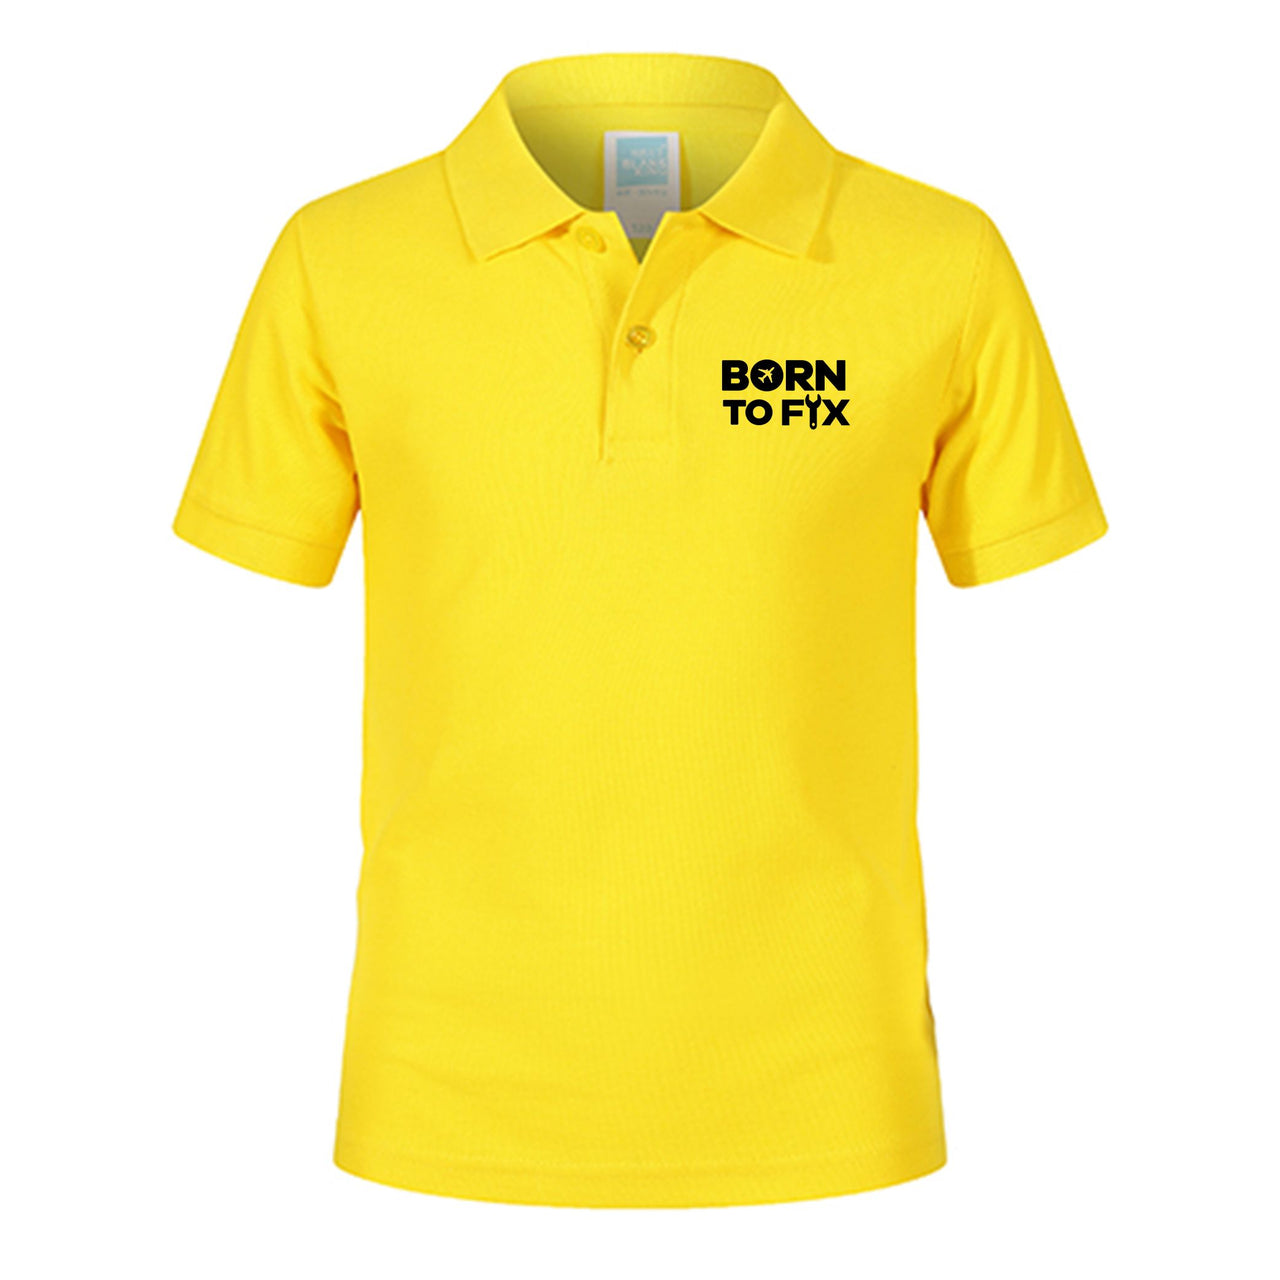 Born To Fix Airplanes Designed Children Polo T-Shirts